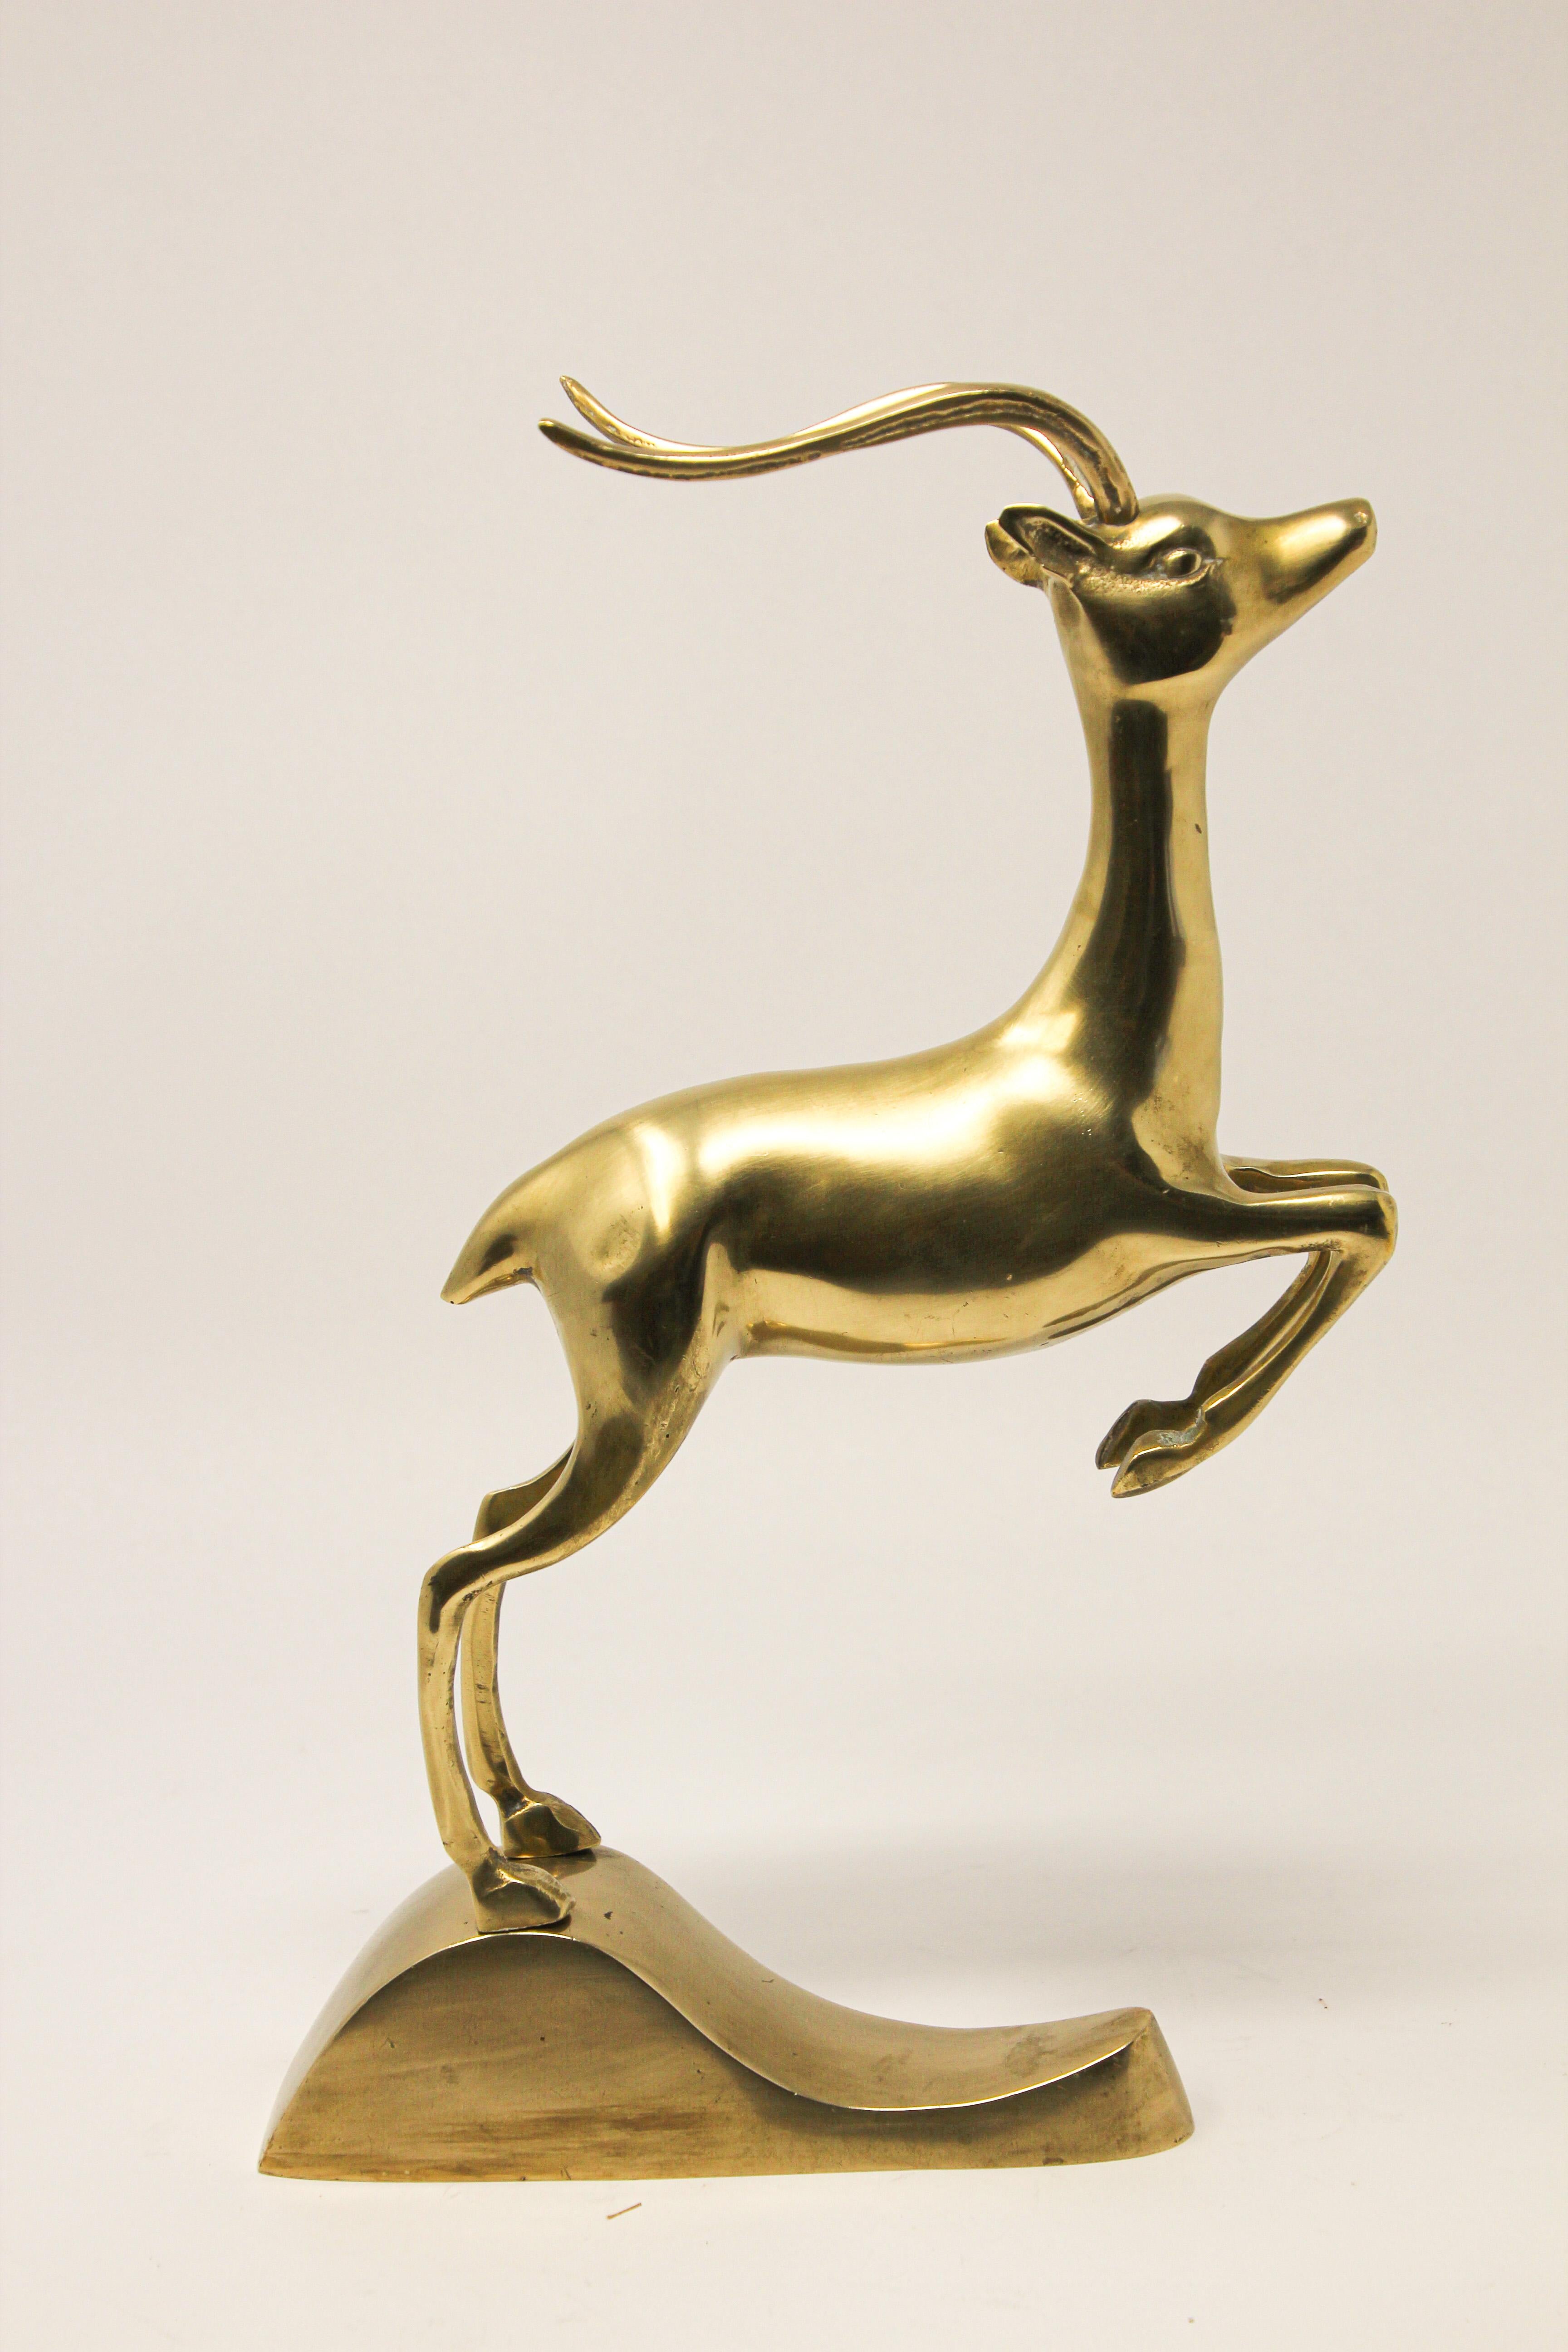 Vintage French Art Deco style brass metal animal sculpture of a leaping antelope, impala, gazelle, deer. 
Brass figurine in polished bass that serve as bookend or as individual decorative animal sculpture. 
A true Hollywood Regency sculpture Kudu,